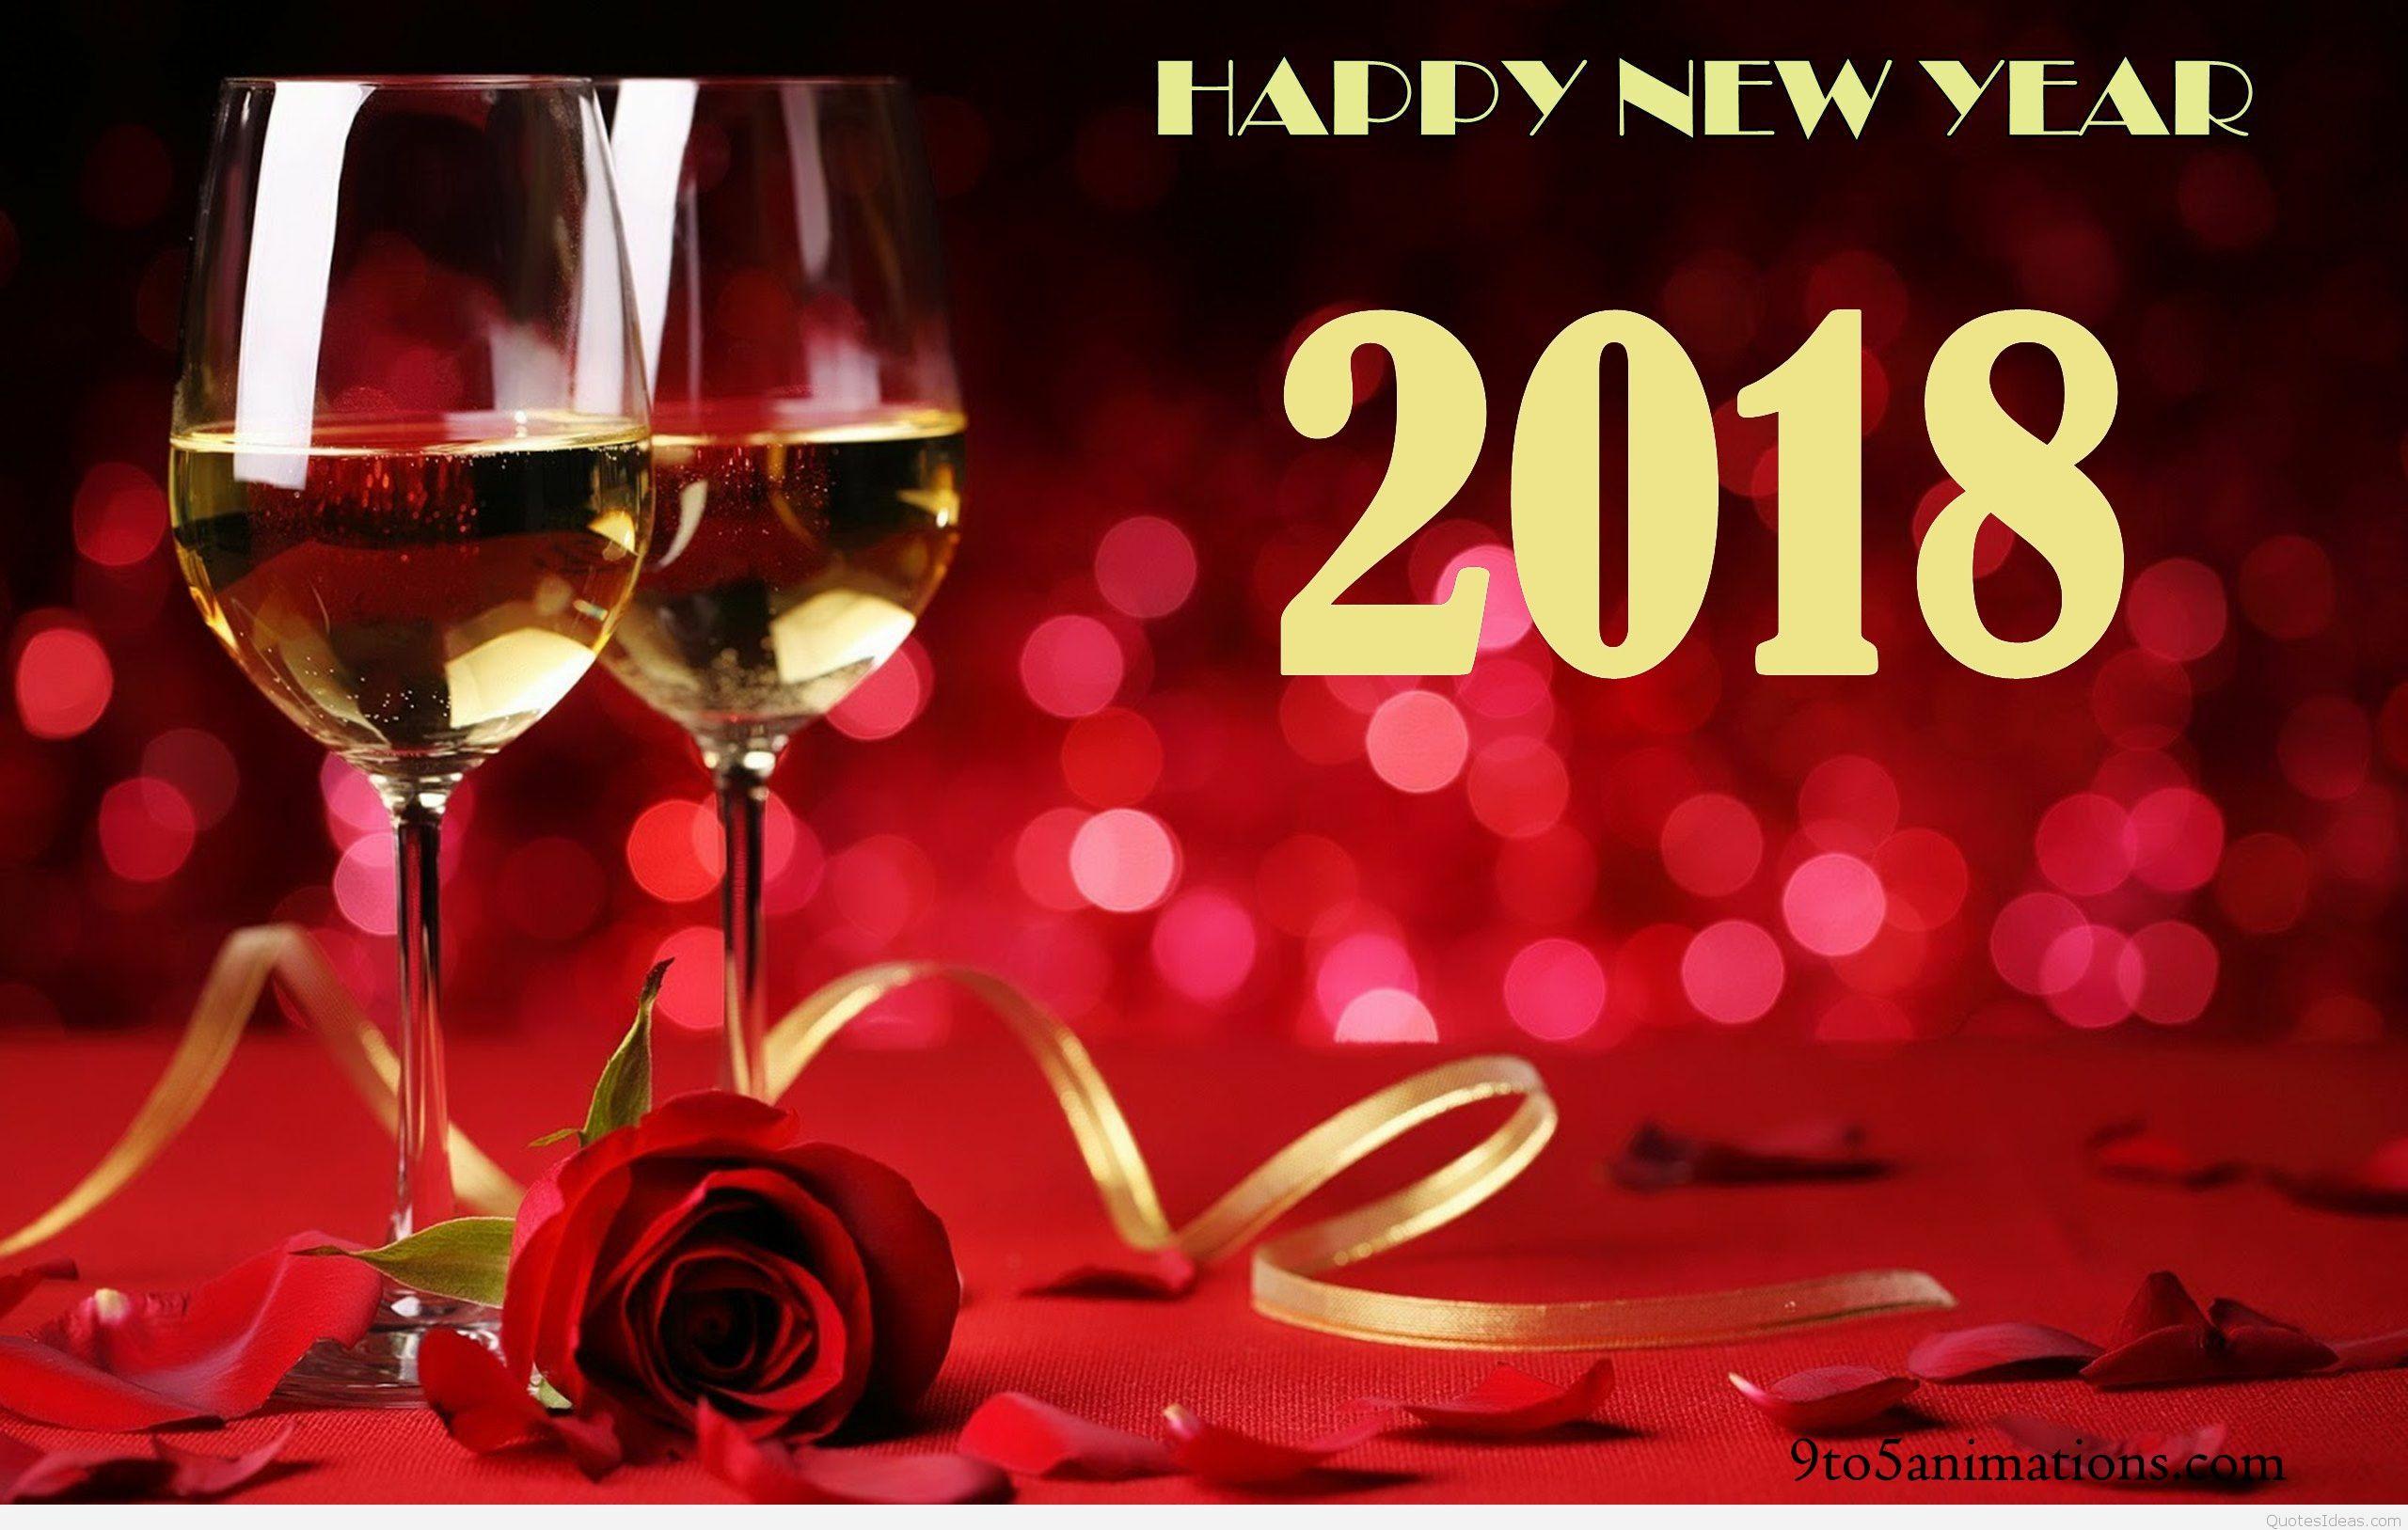 Best New Year Wishes Image FreeTo5Animations.Com